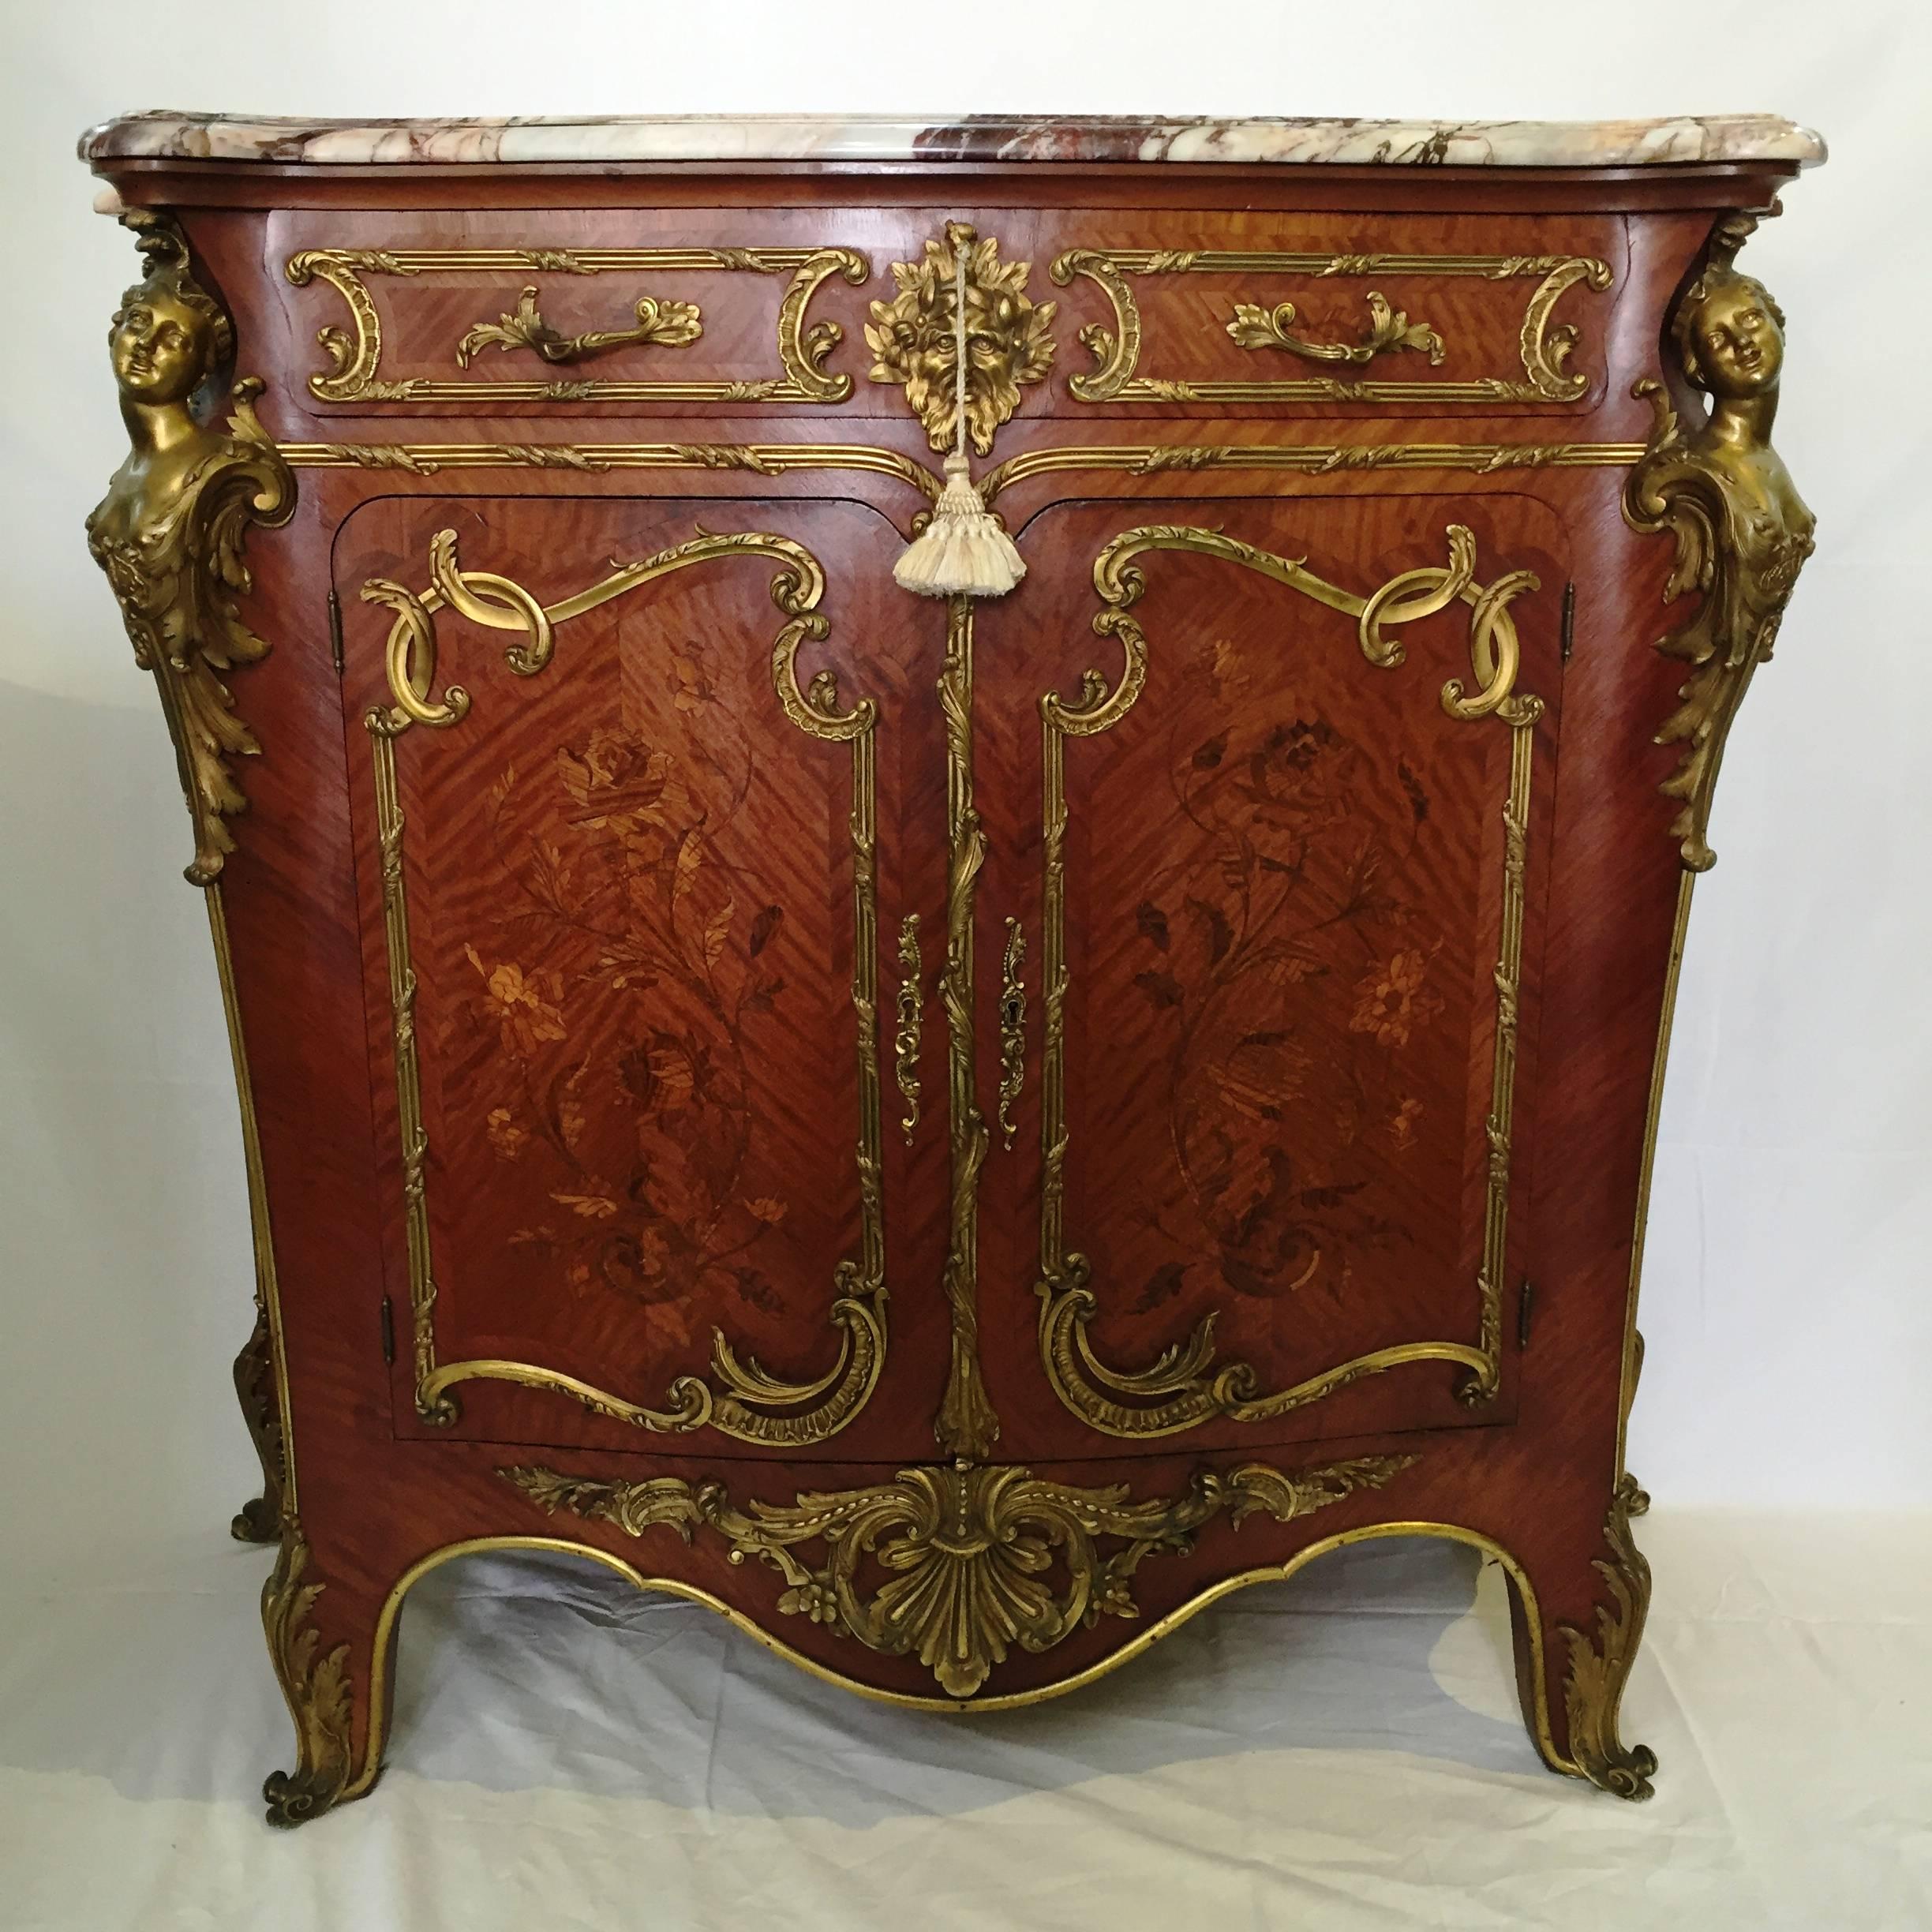 A superb and rare pair of Louis XV style kingwood ormolu-mounted side cabinets having the original breche marble tops, wonderful marquetry inlaid panels to the doors and sides. Scrolling ormolu mounts, mythical masks to the drawer fronts and